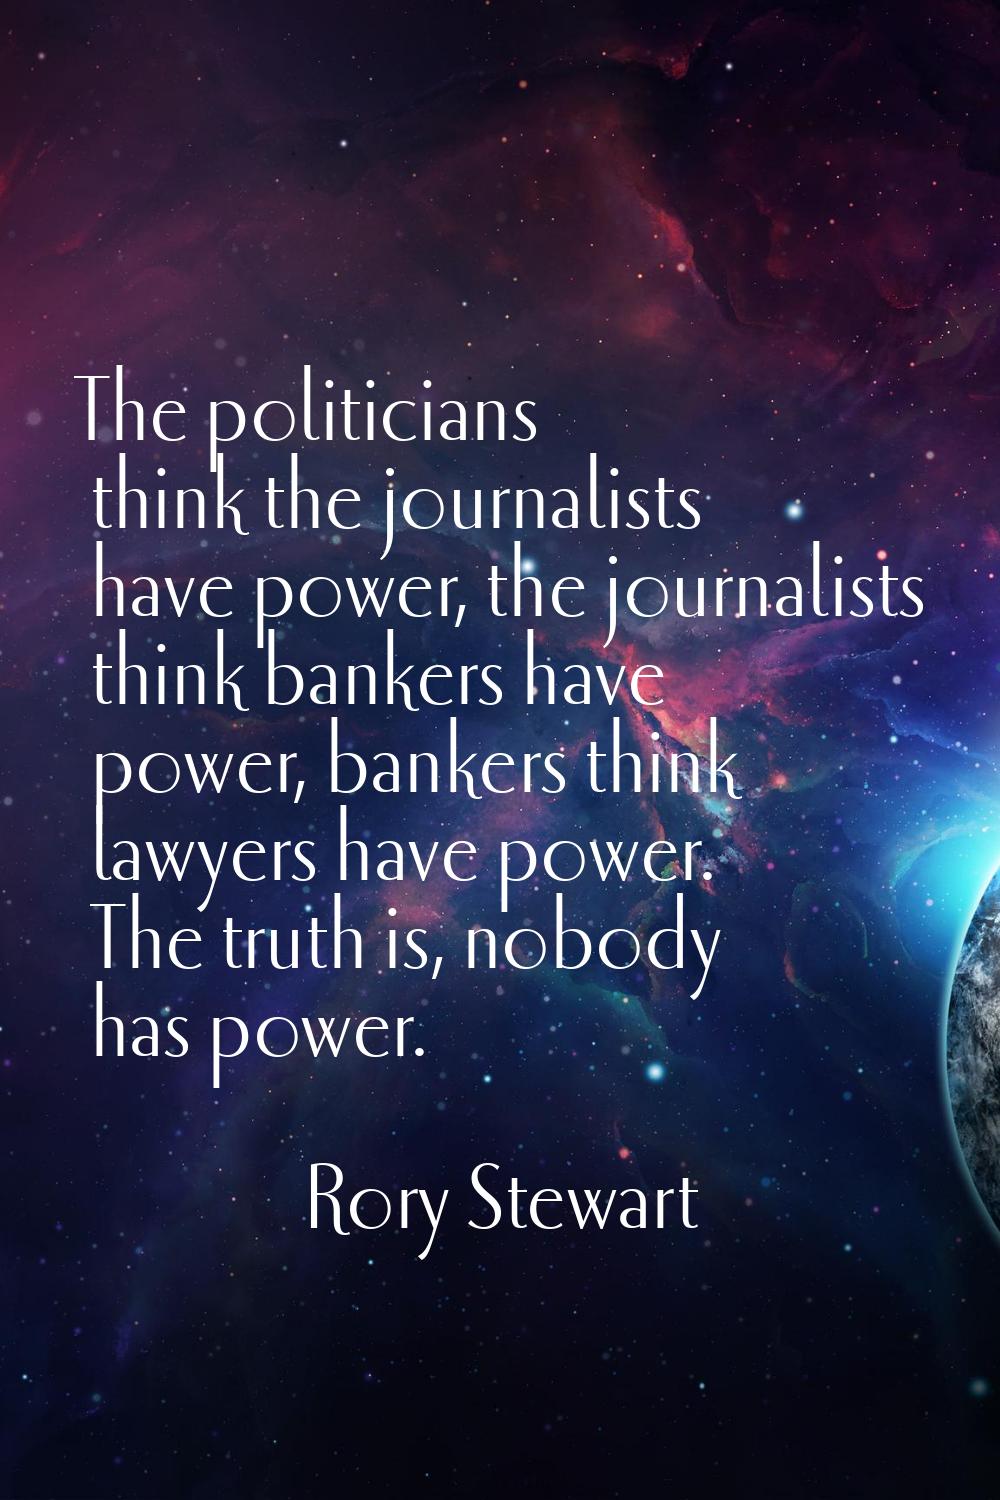 The politicians think the journalists have power, the journalists think bankers have power, bankers